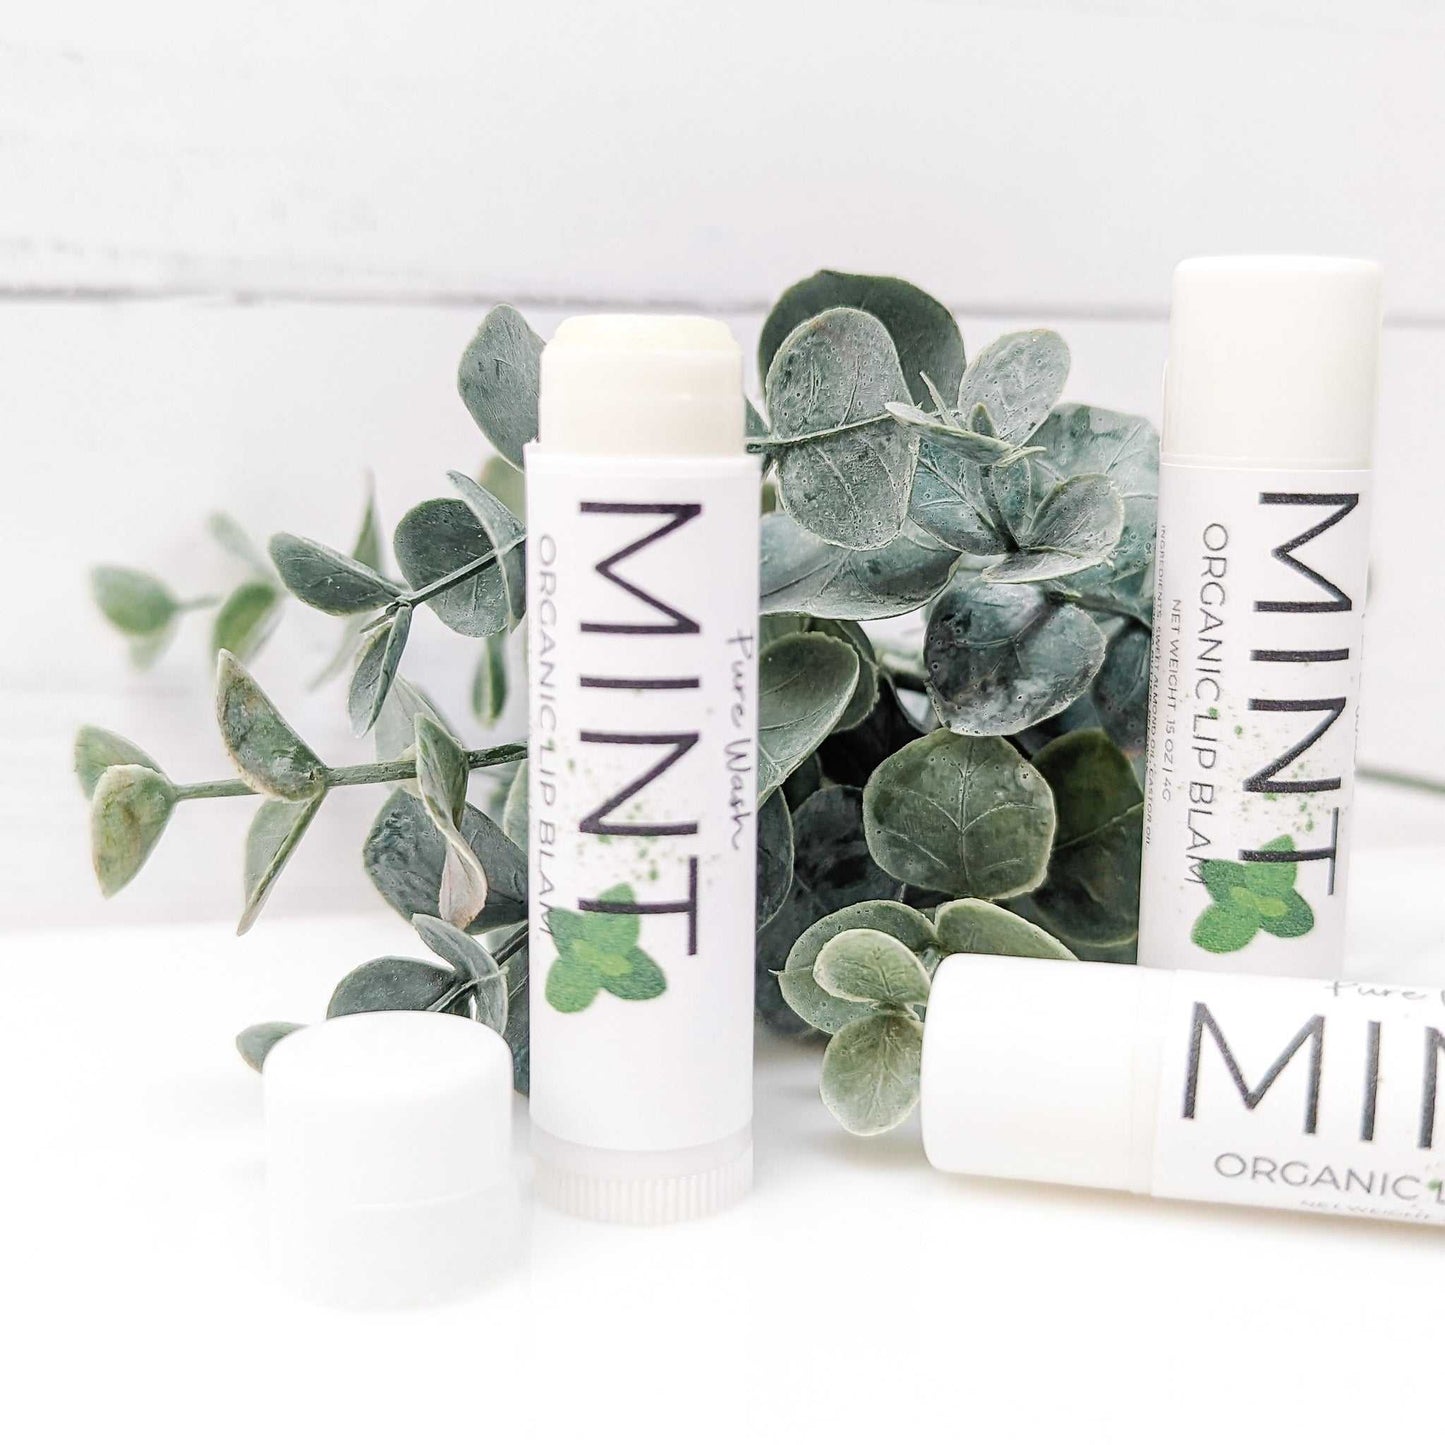 Rejuvenating Minty Lip Balm formulated with natural ingredients for supple, smooth lips | CG Pure Wash